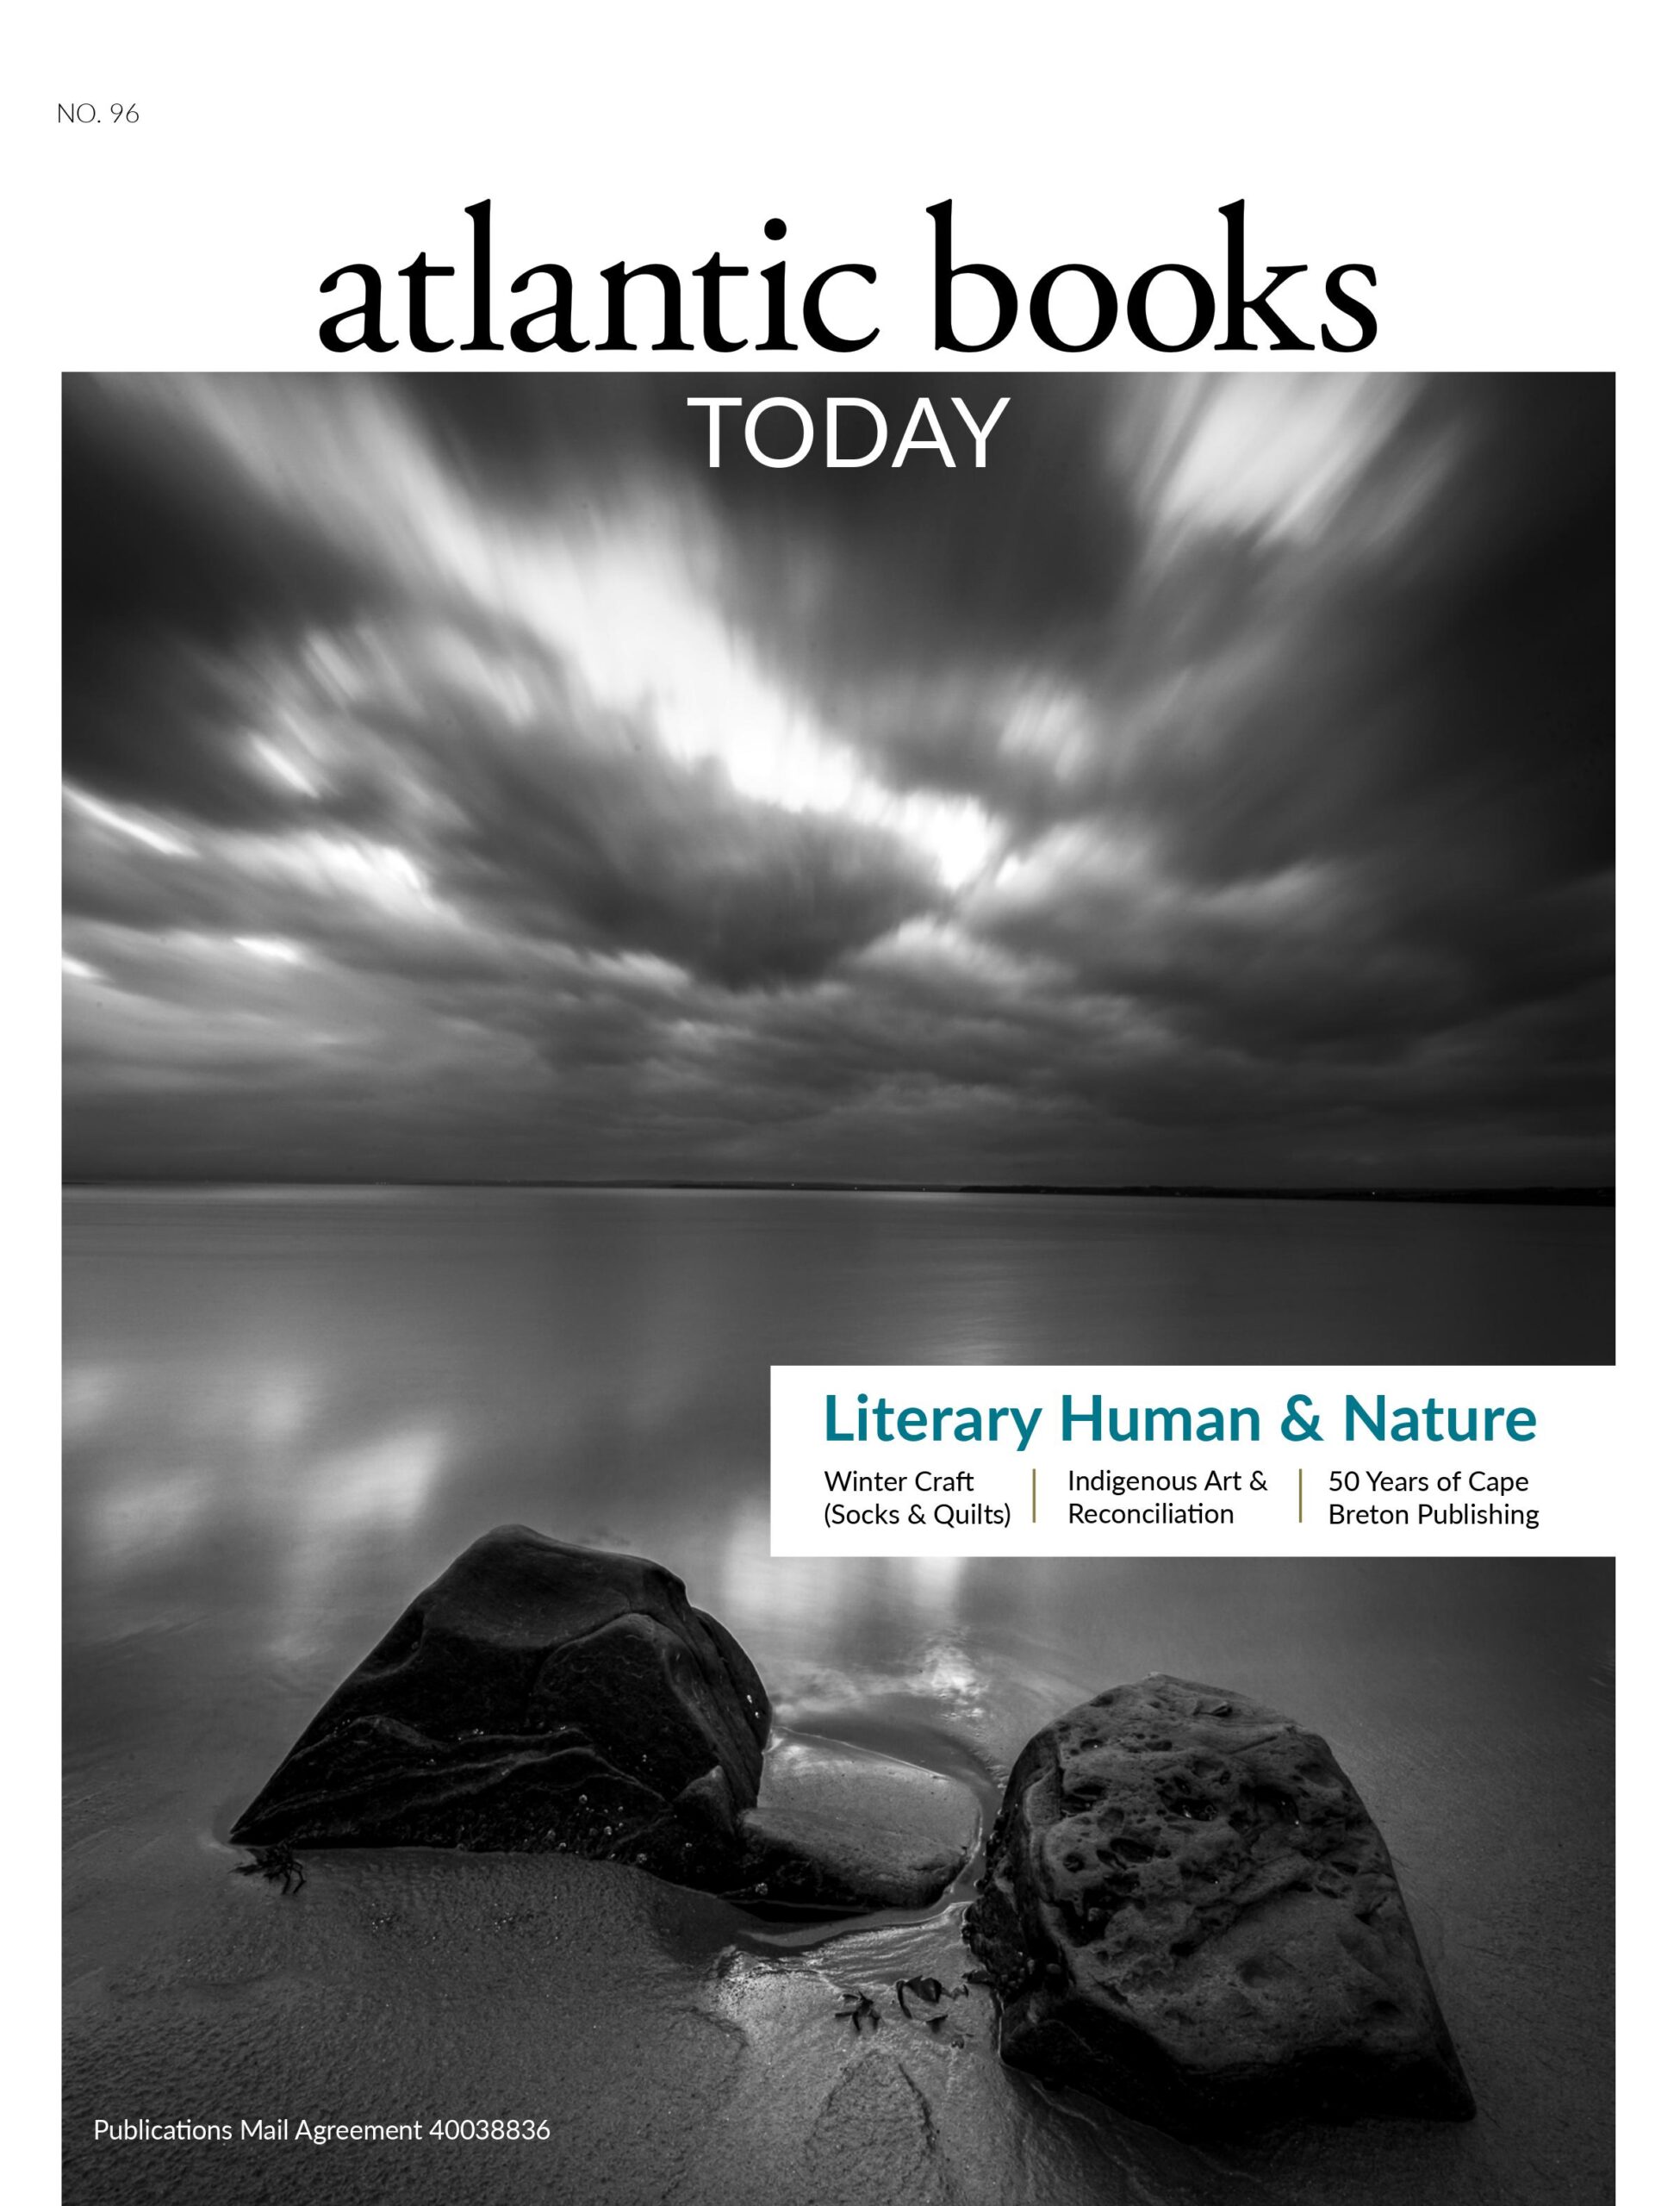 Introducing Our 30th-Anniversary Year Fall Issue: Literary Human and Nature